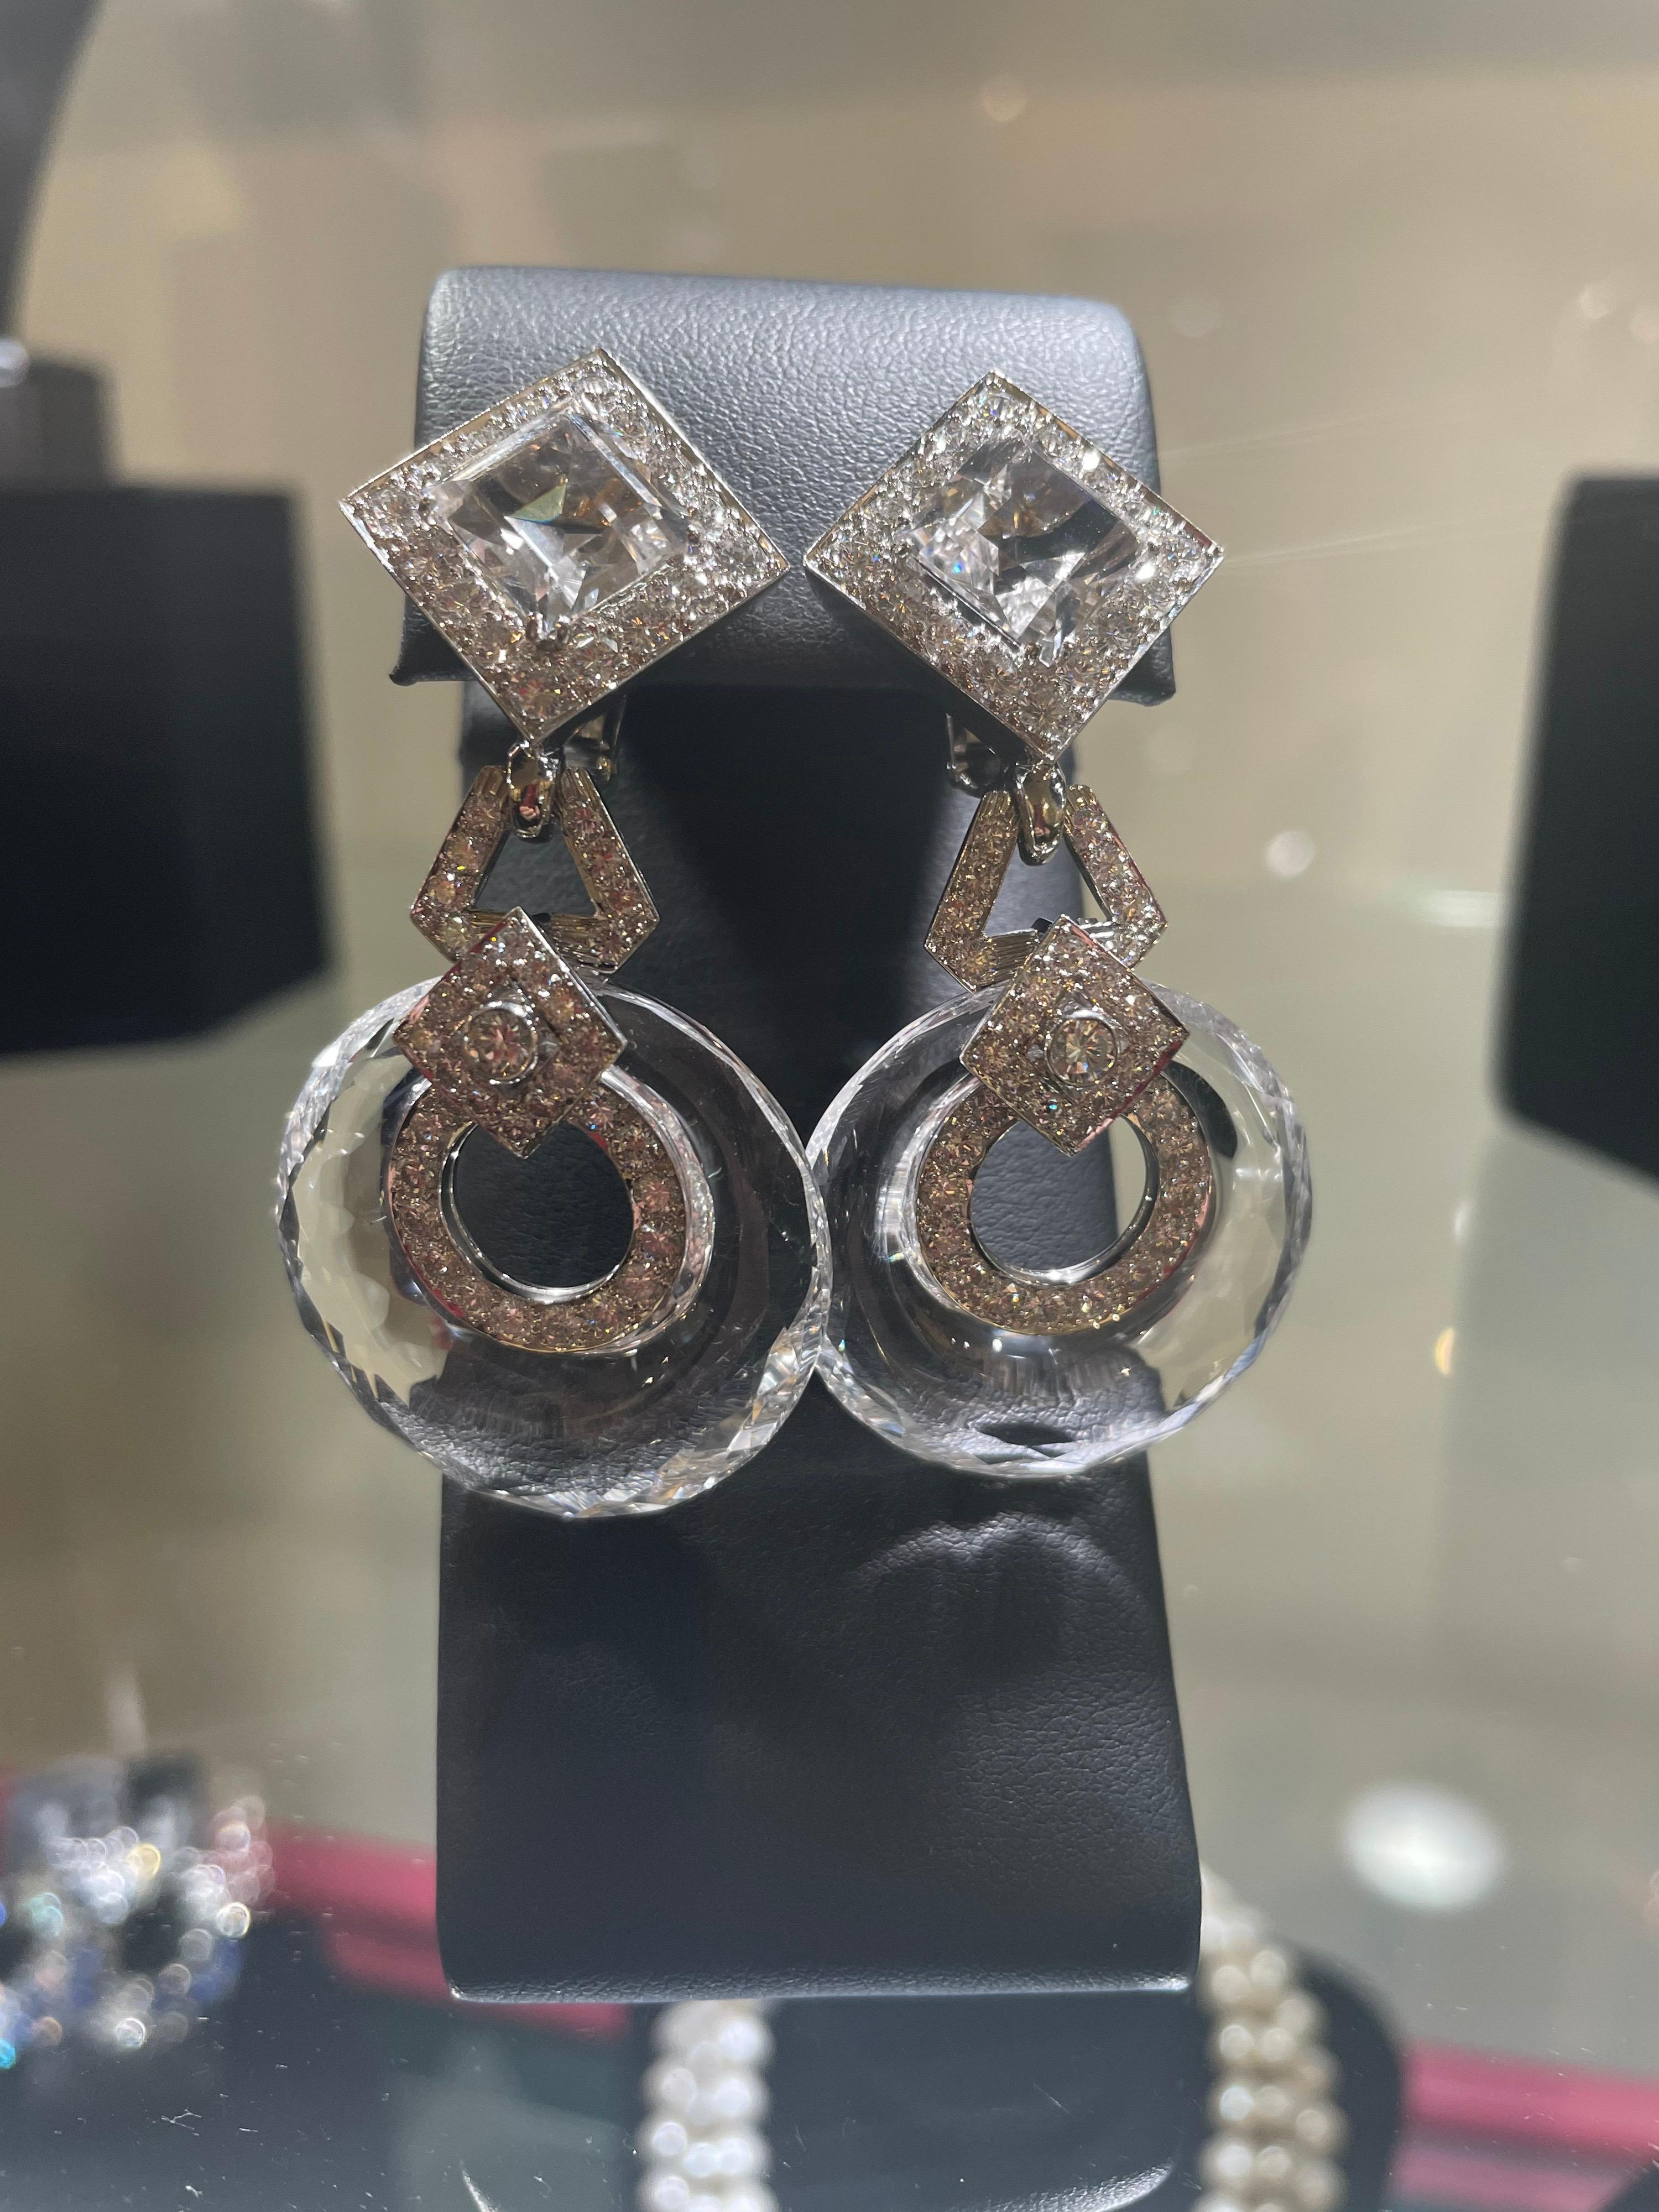 Classic David Webb earrings with COA from David Webb.
These Rock Crystal earrings are stunning with hoop drops and diamond accents